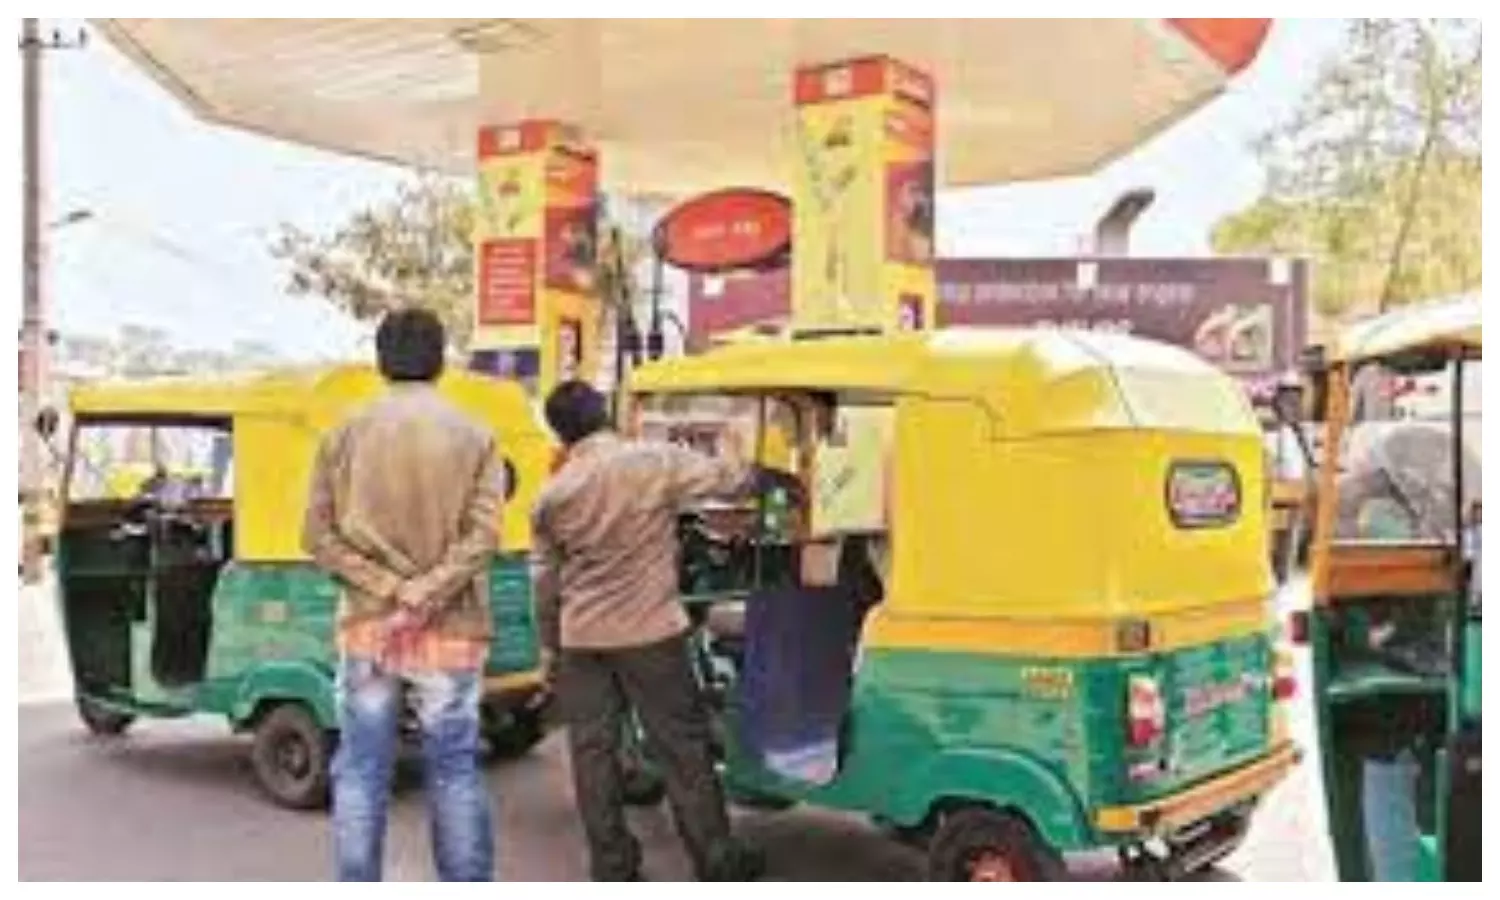 CNG Price Cut